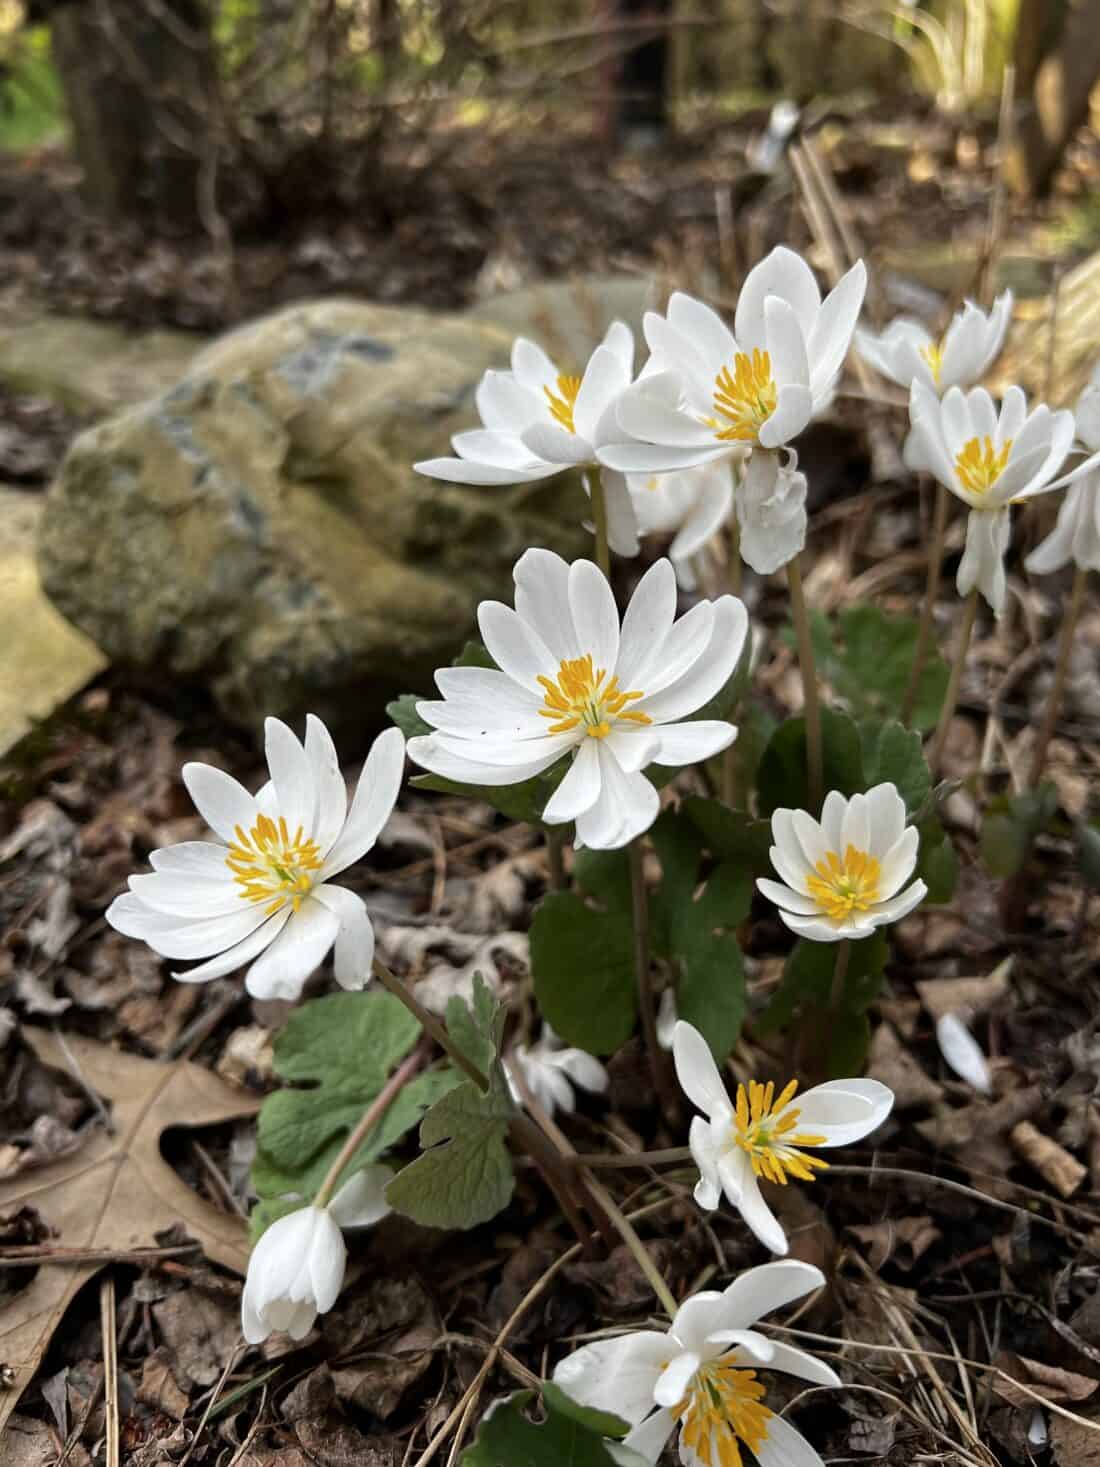 A group of white bloodroot flowers in a wooded area.